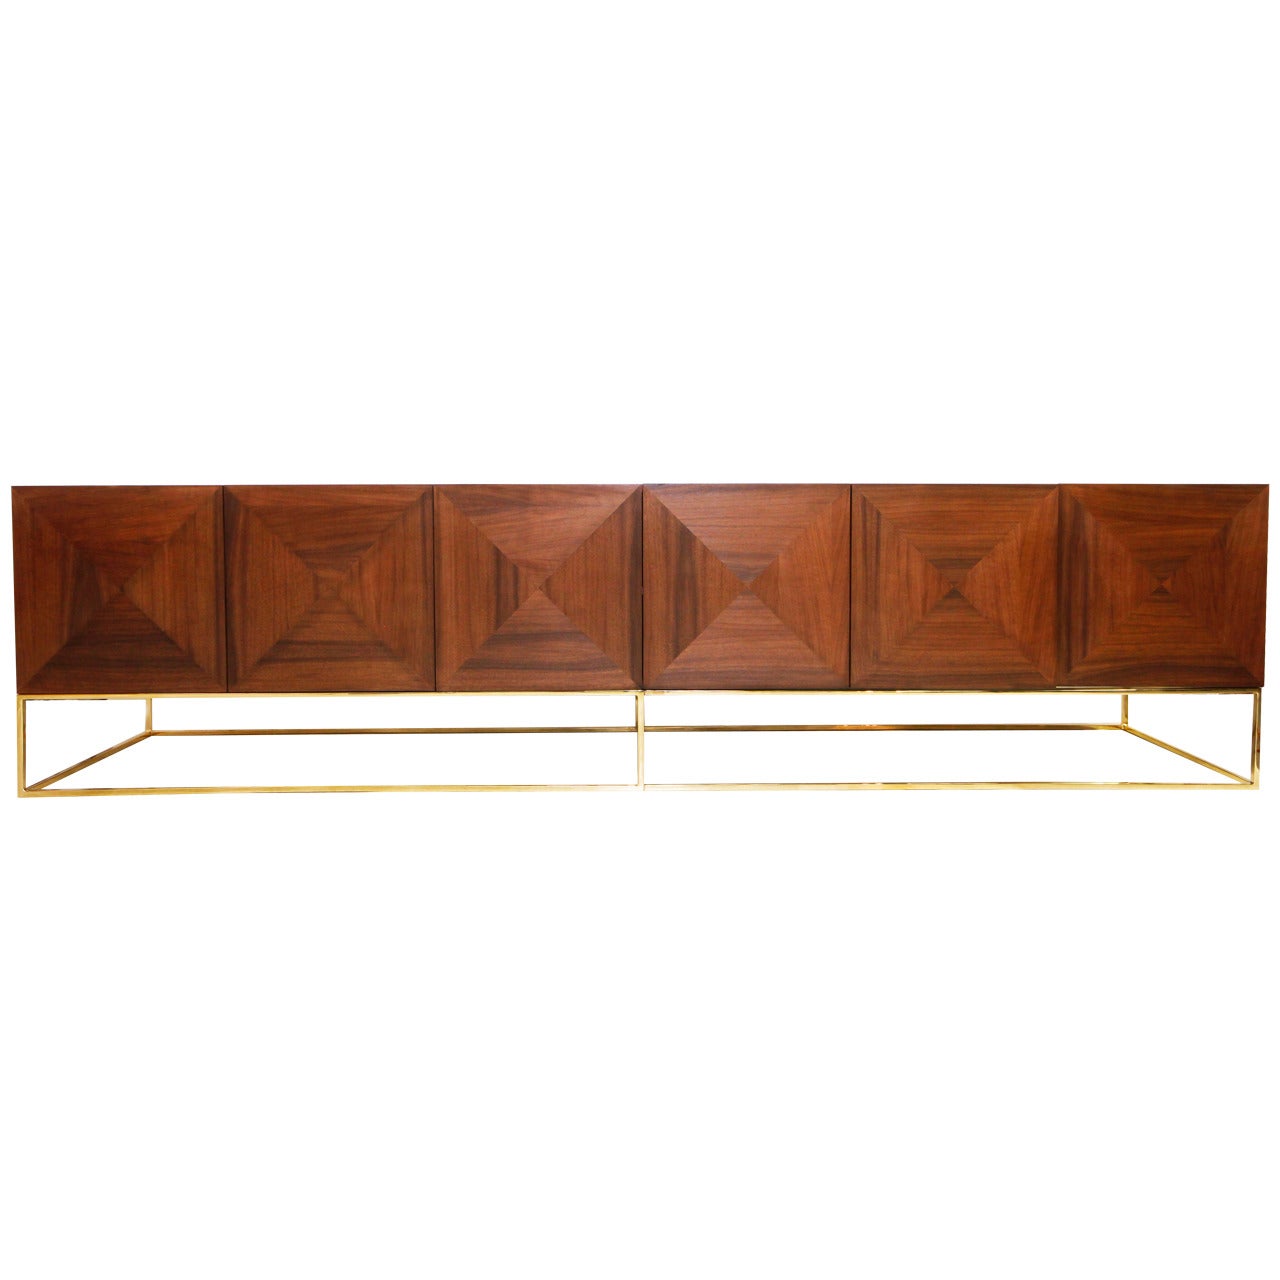 Massive Walnut and Brass Floating Media Credenza by Loft Thirteen For Sale